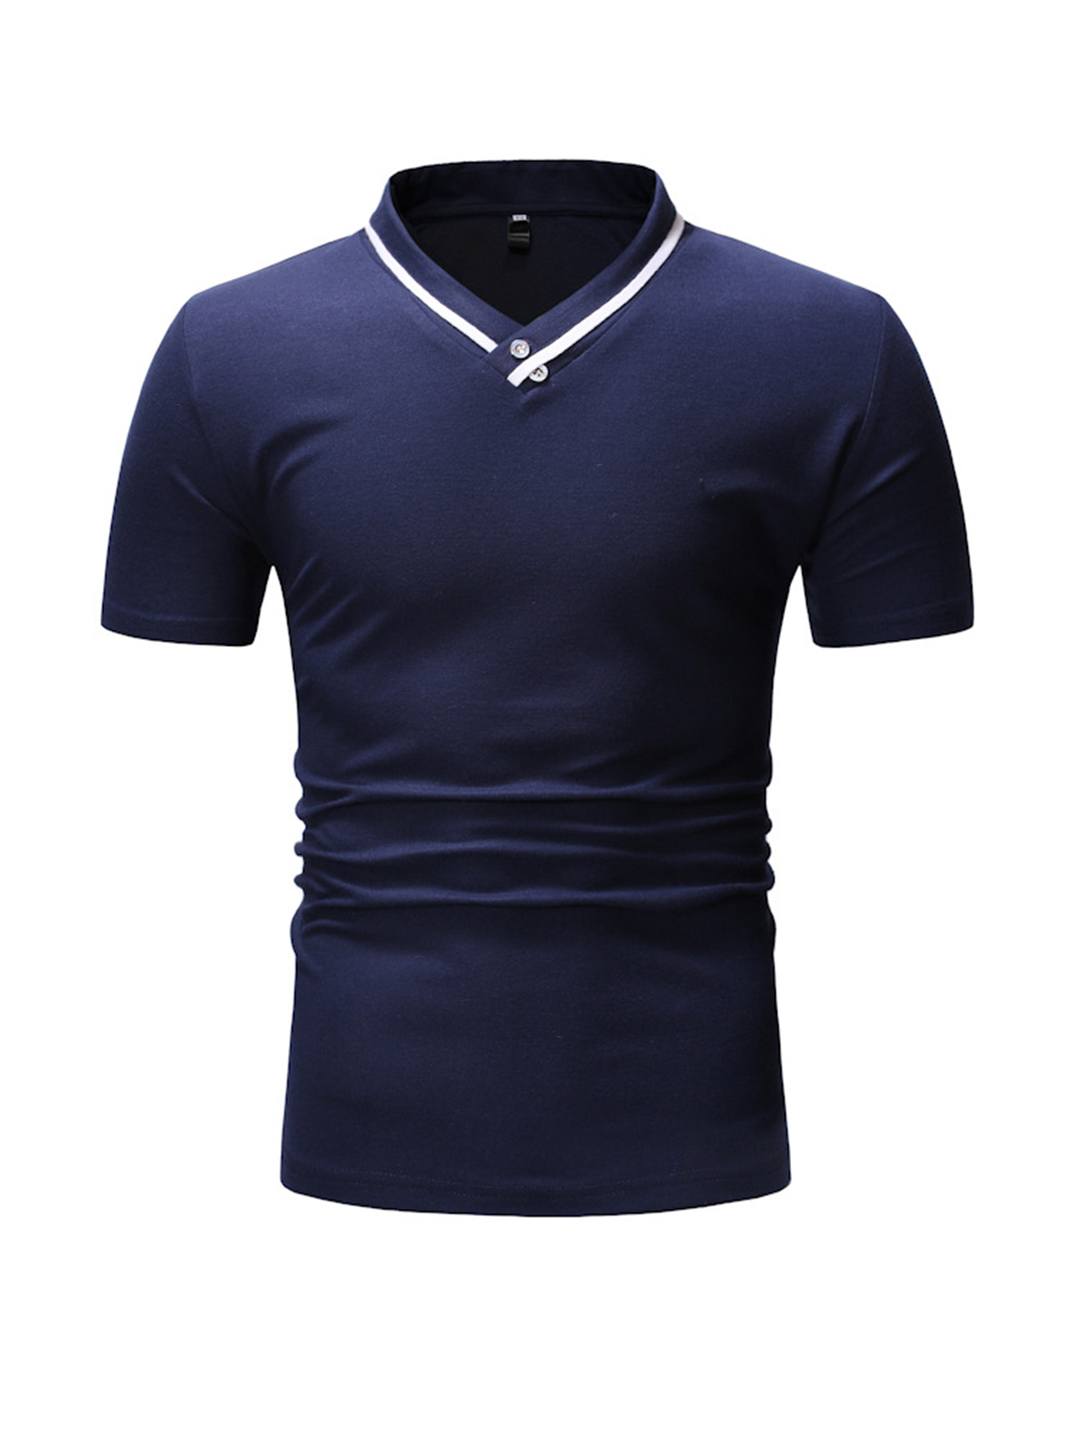 Kenney Solid Color V Neck Casual T-shirt-poisonstreetwear.com